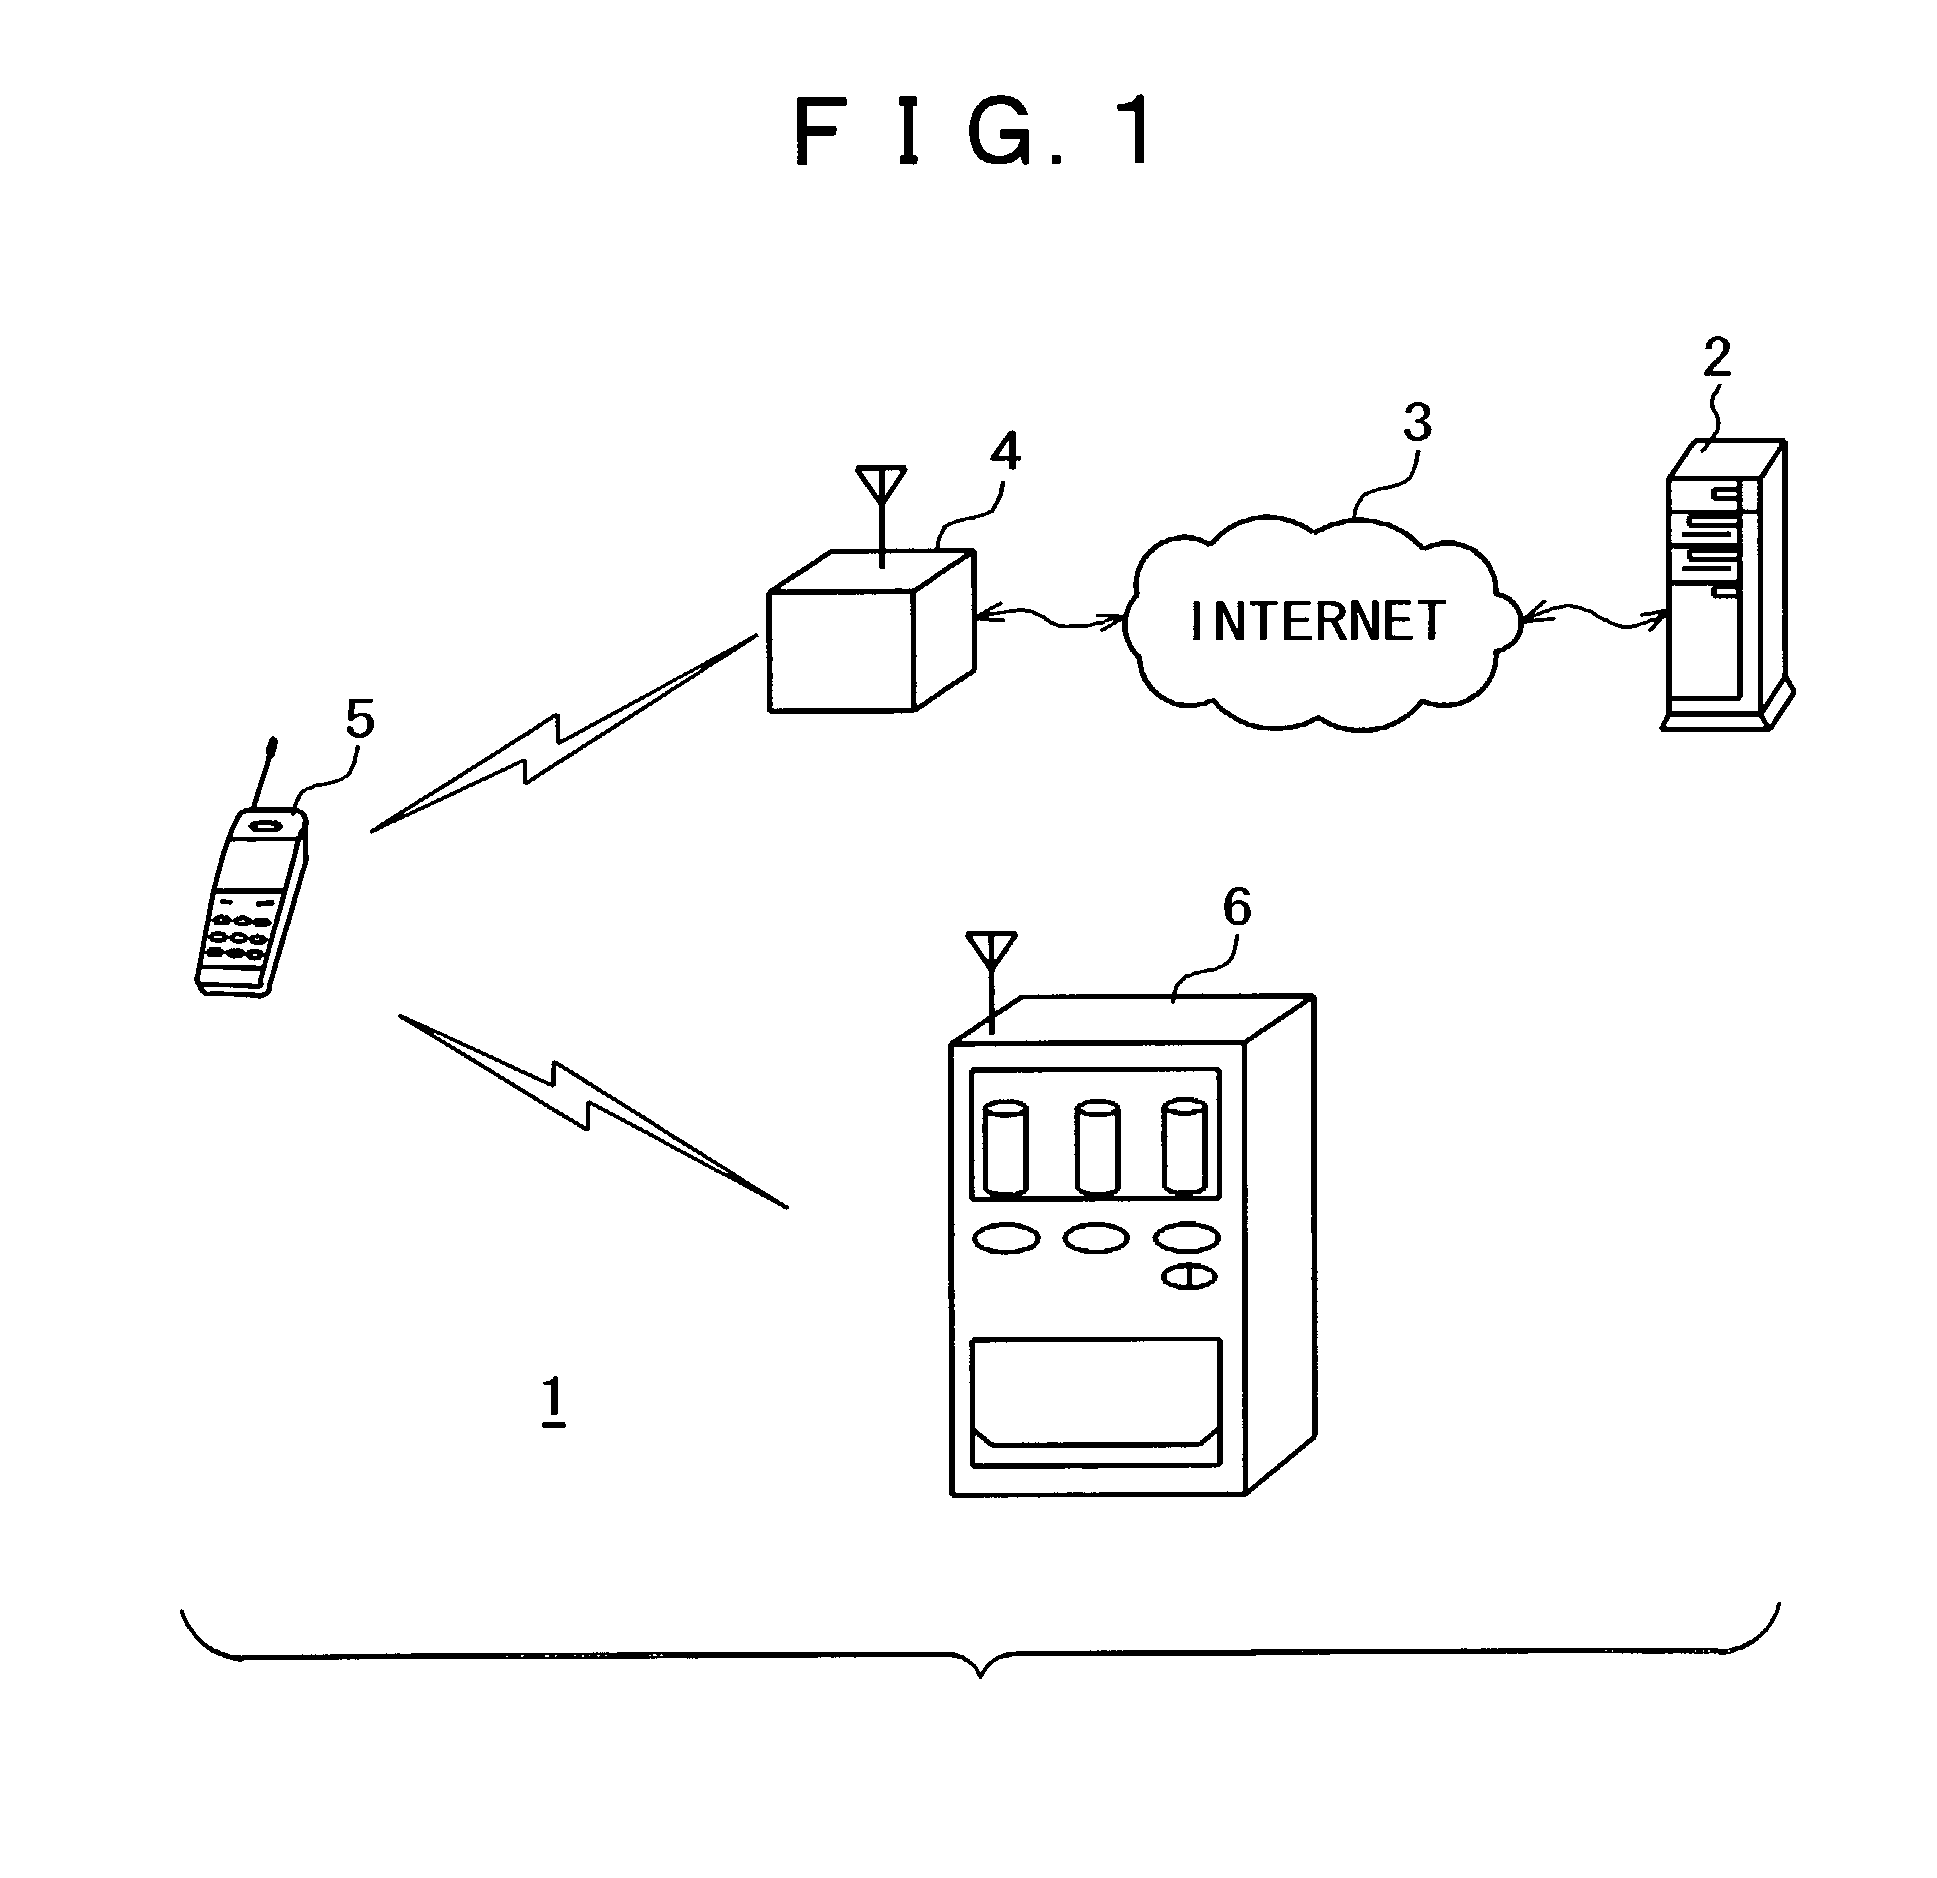 Certification system, certification apparatus, and certification method